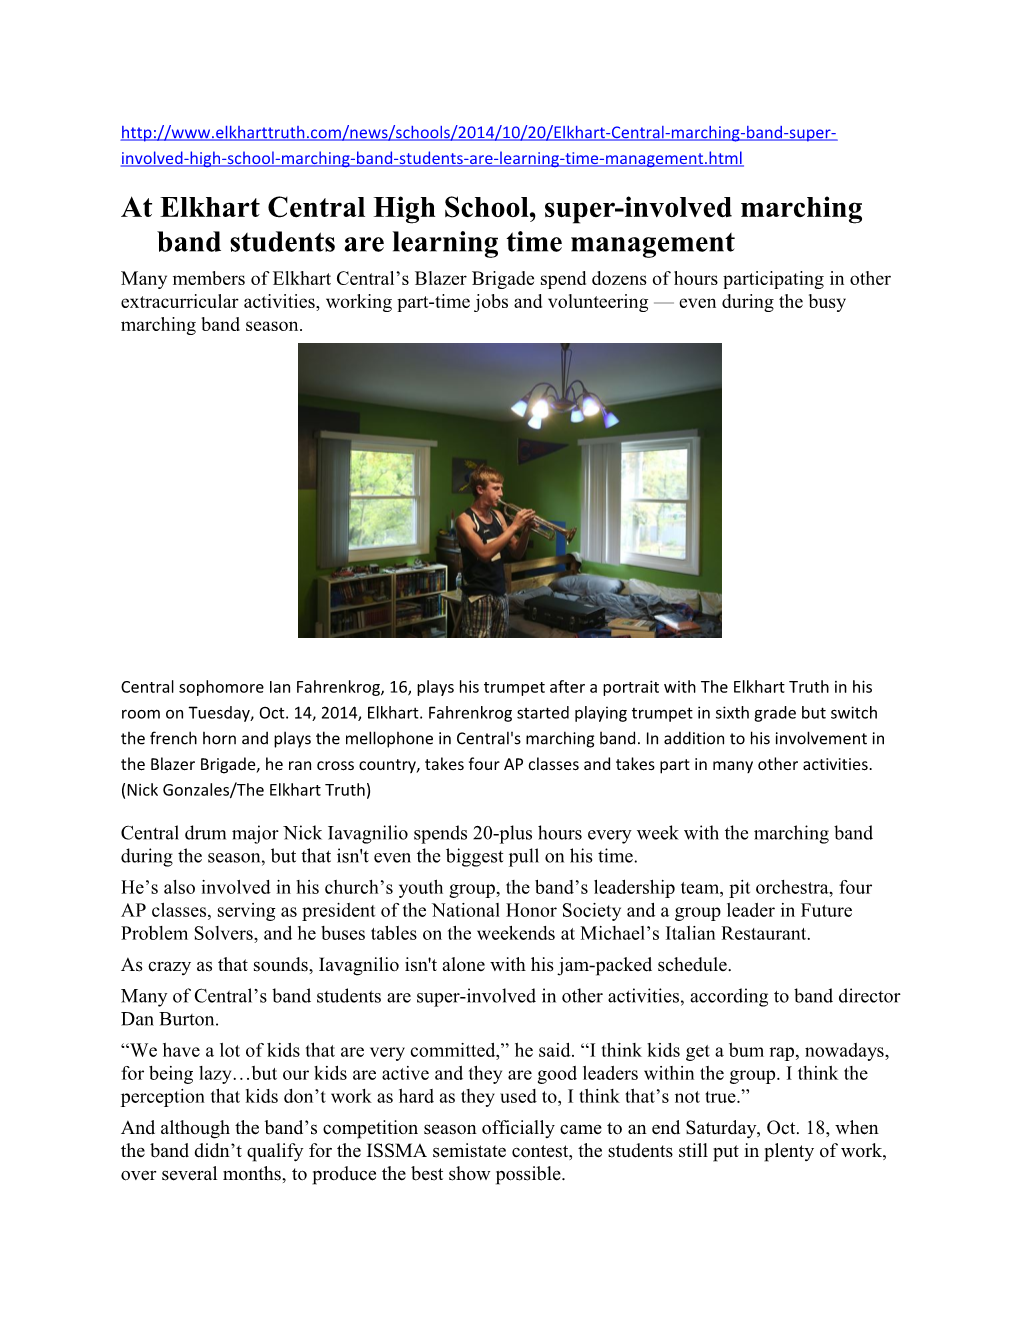 At Elkhart Central High School, Super-Involved Marching Band Students Are Learning Time